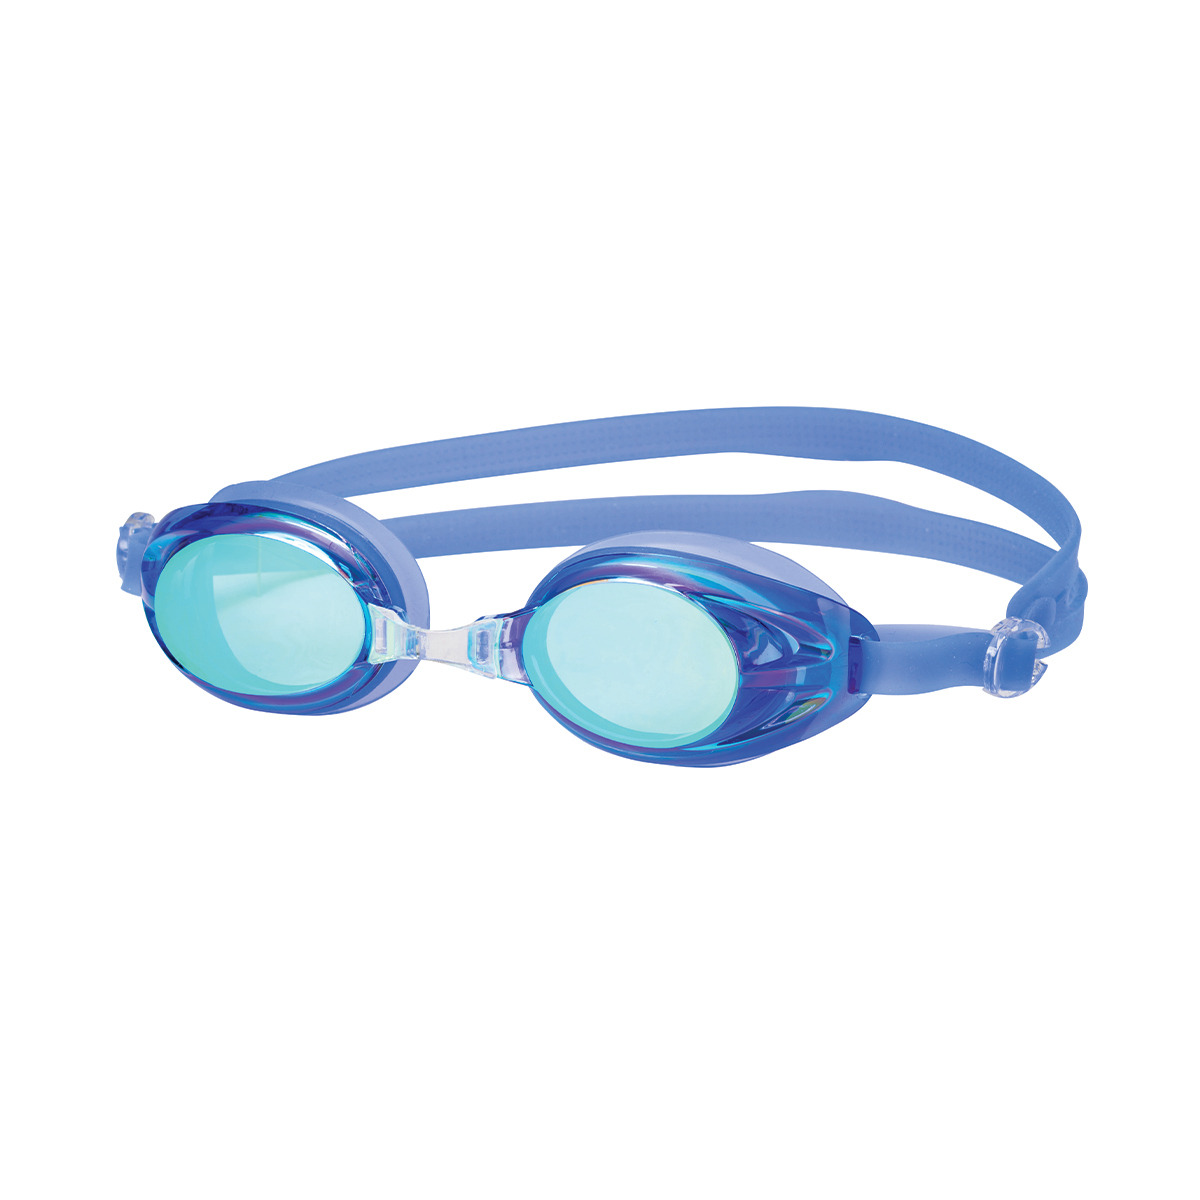 Relay Blue Mirrored Goggles